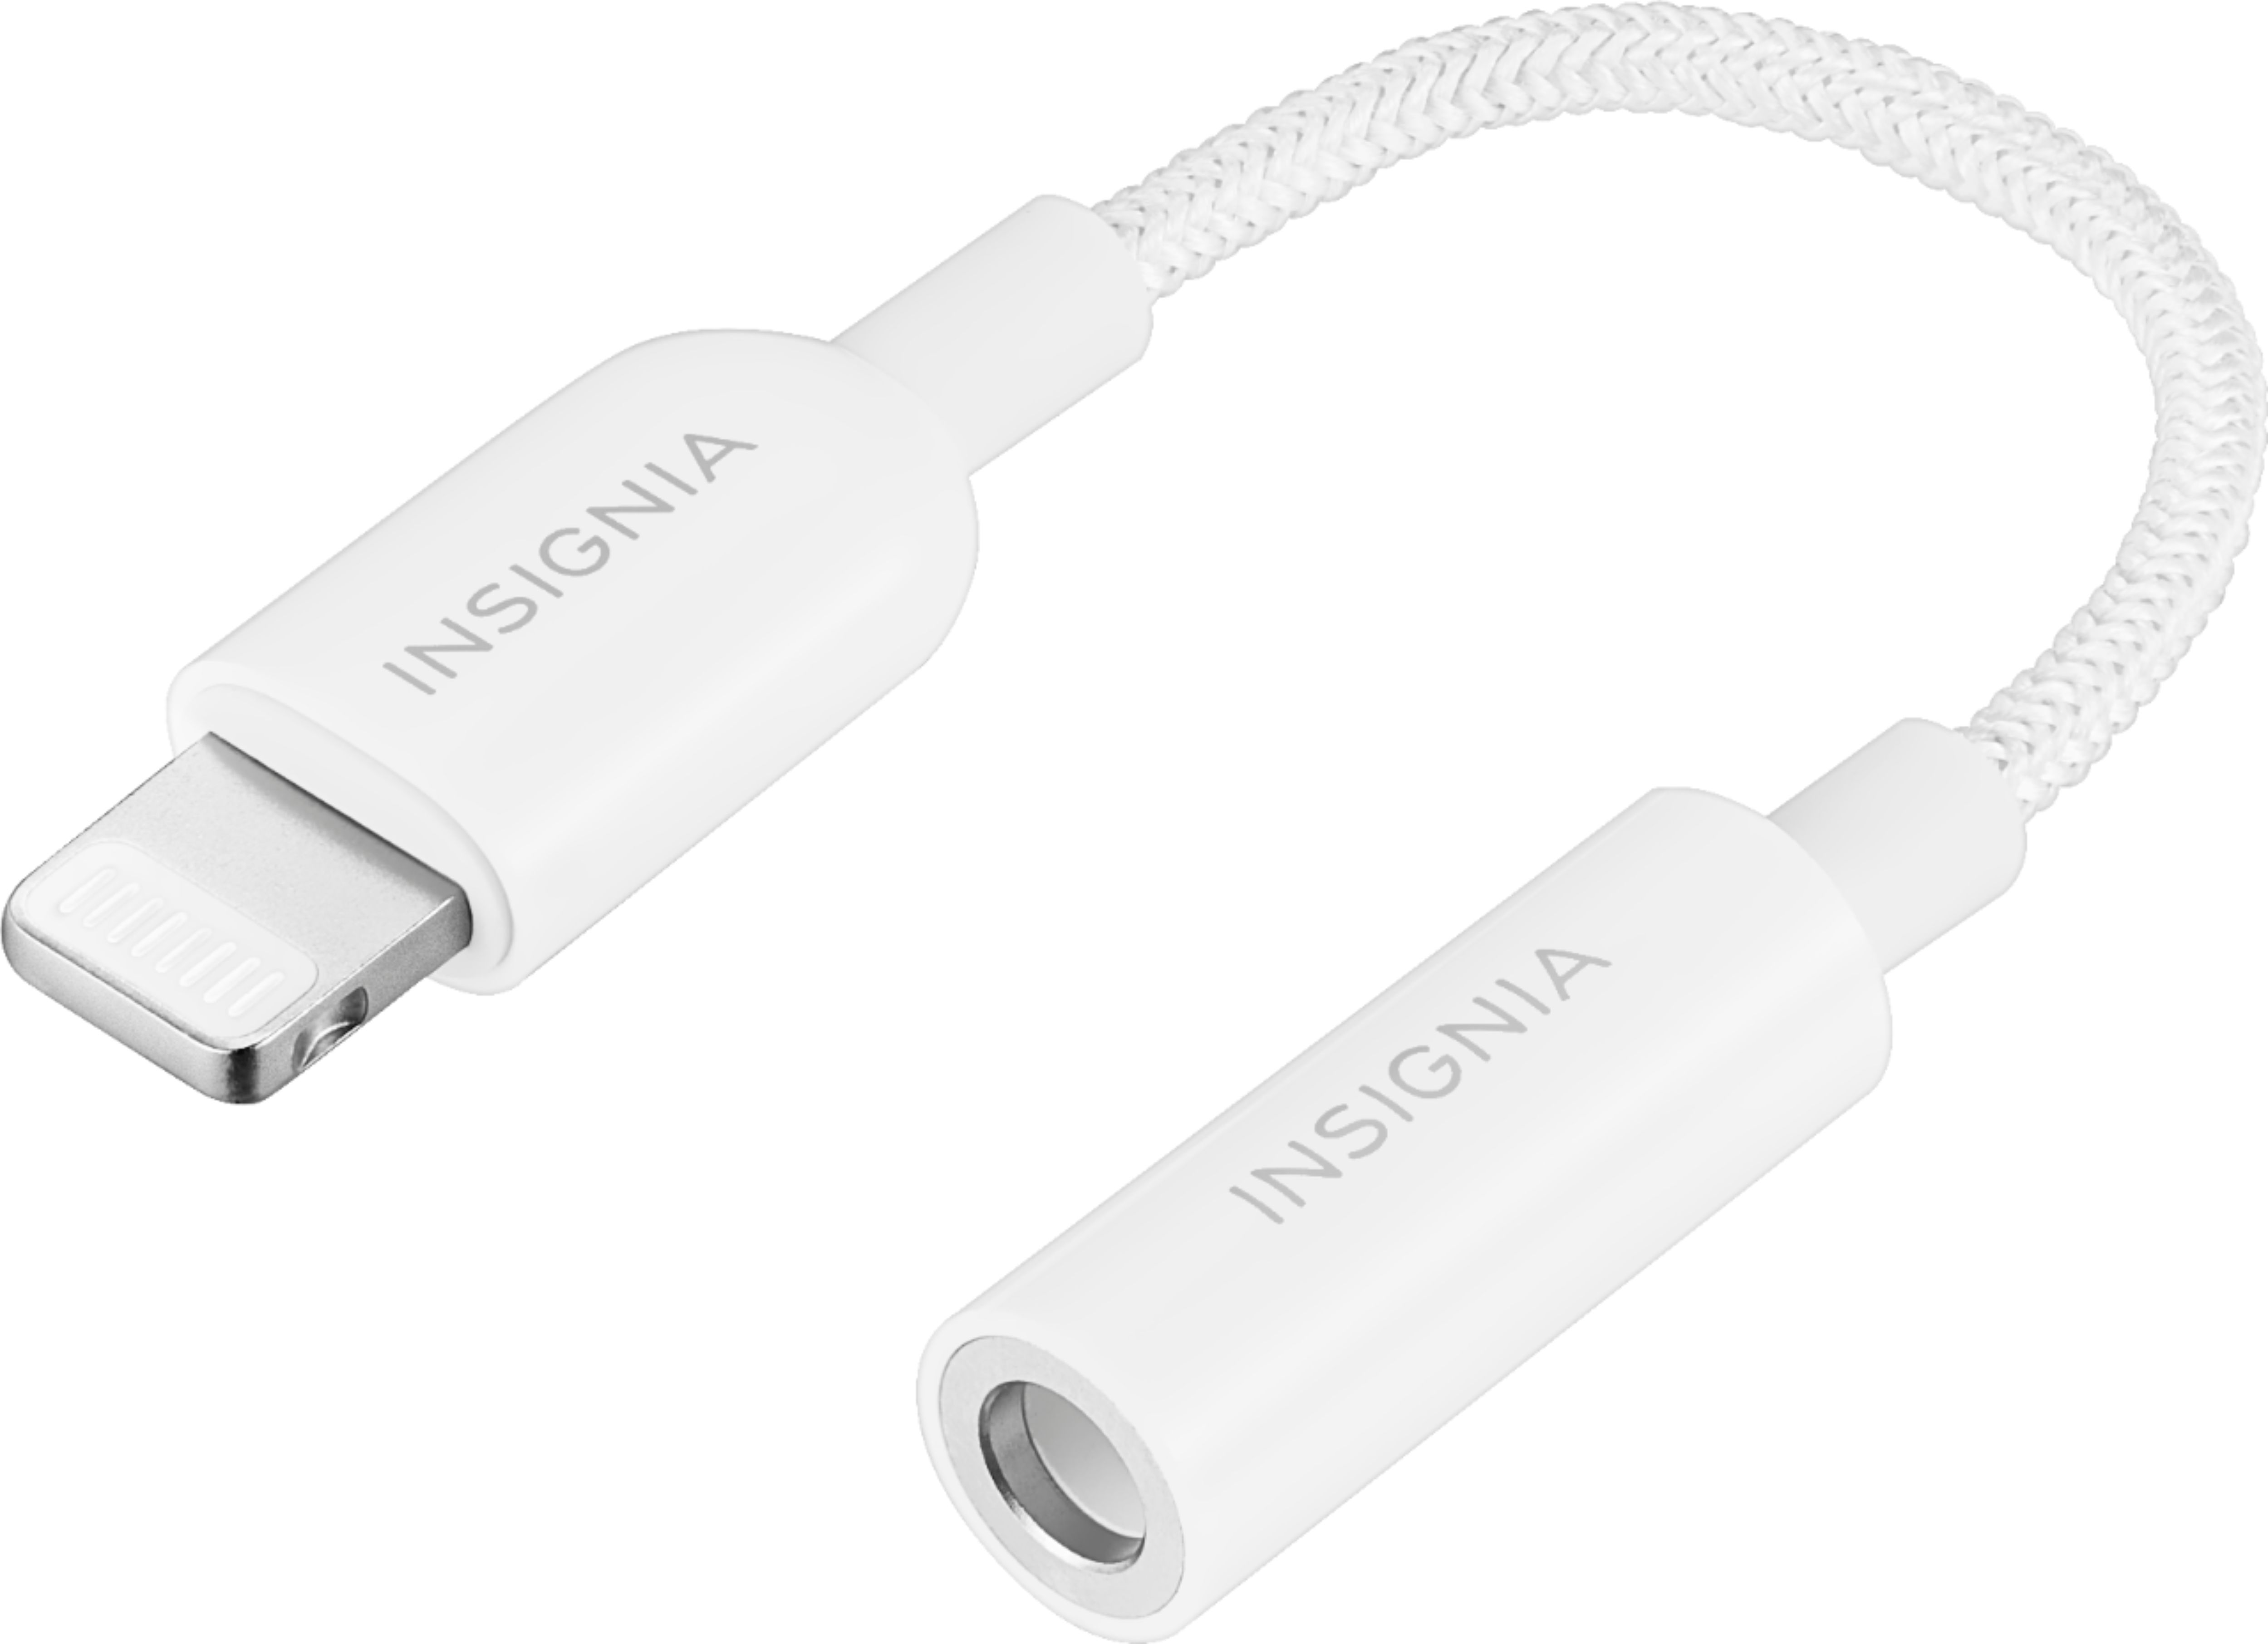 Iphone 3.5 mm to Headset 5 Pin Connect Cable